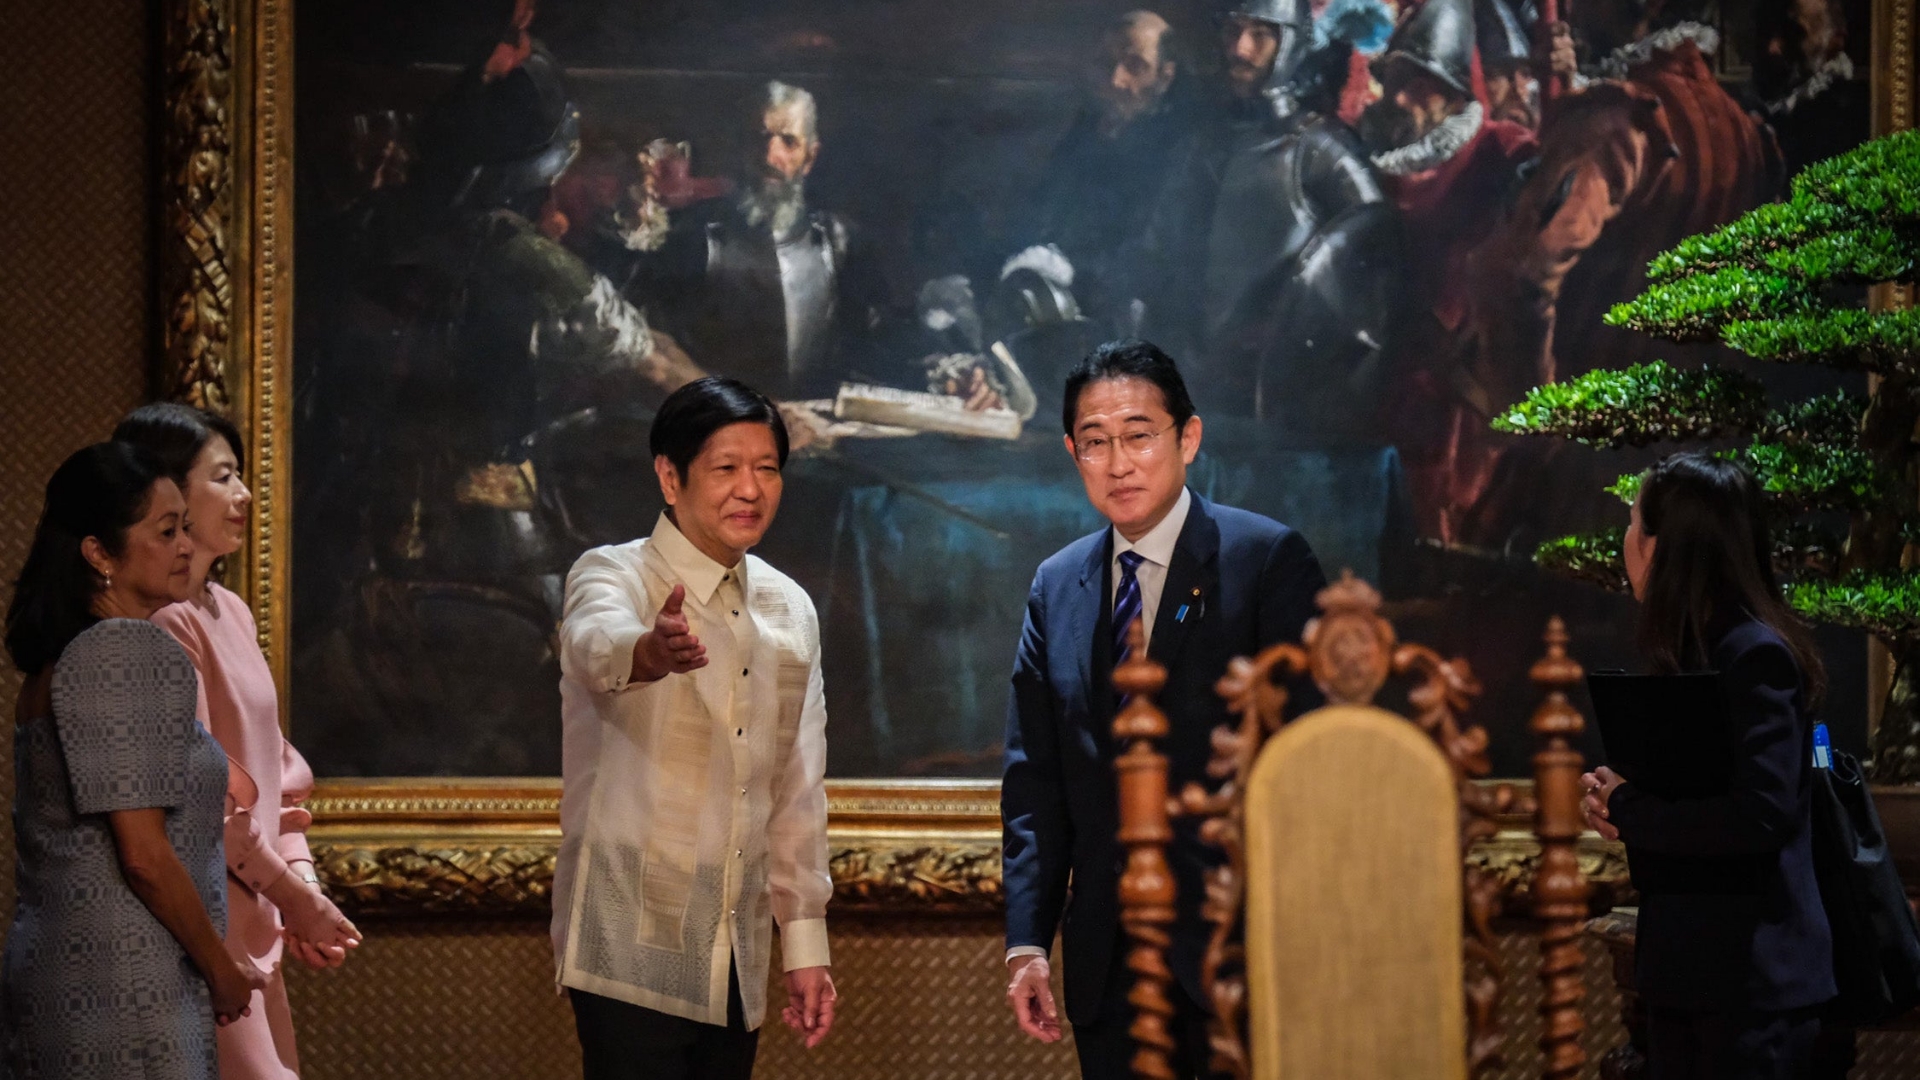 Discussions on a visiting forces agreement are initiated between Japan and Philippines.